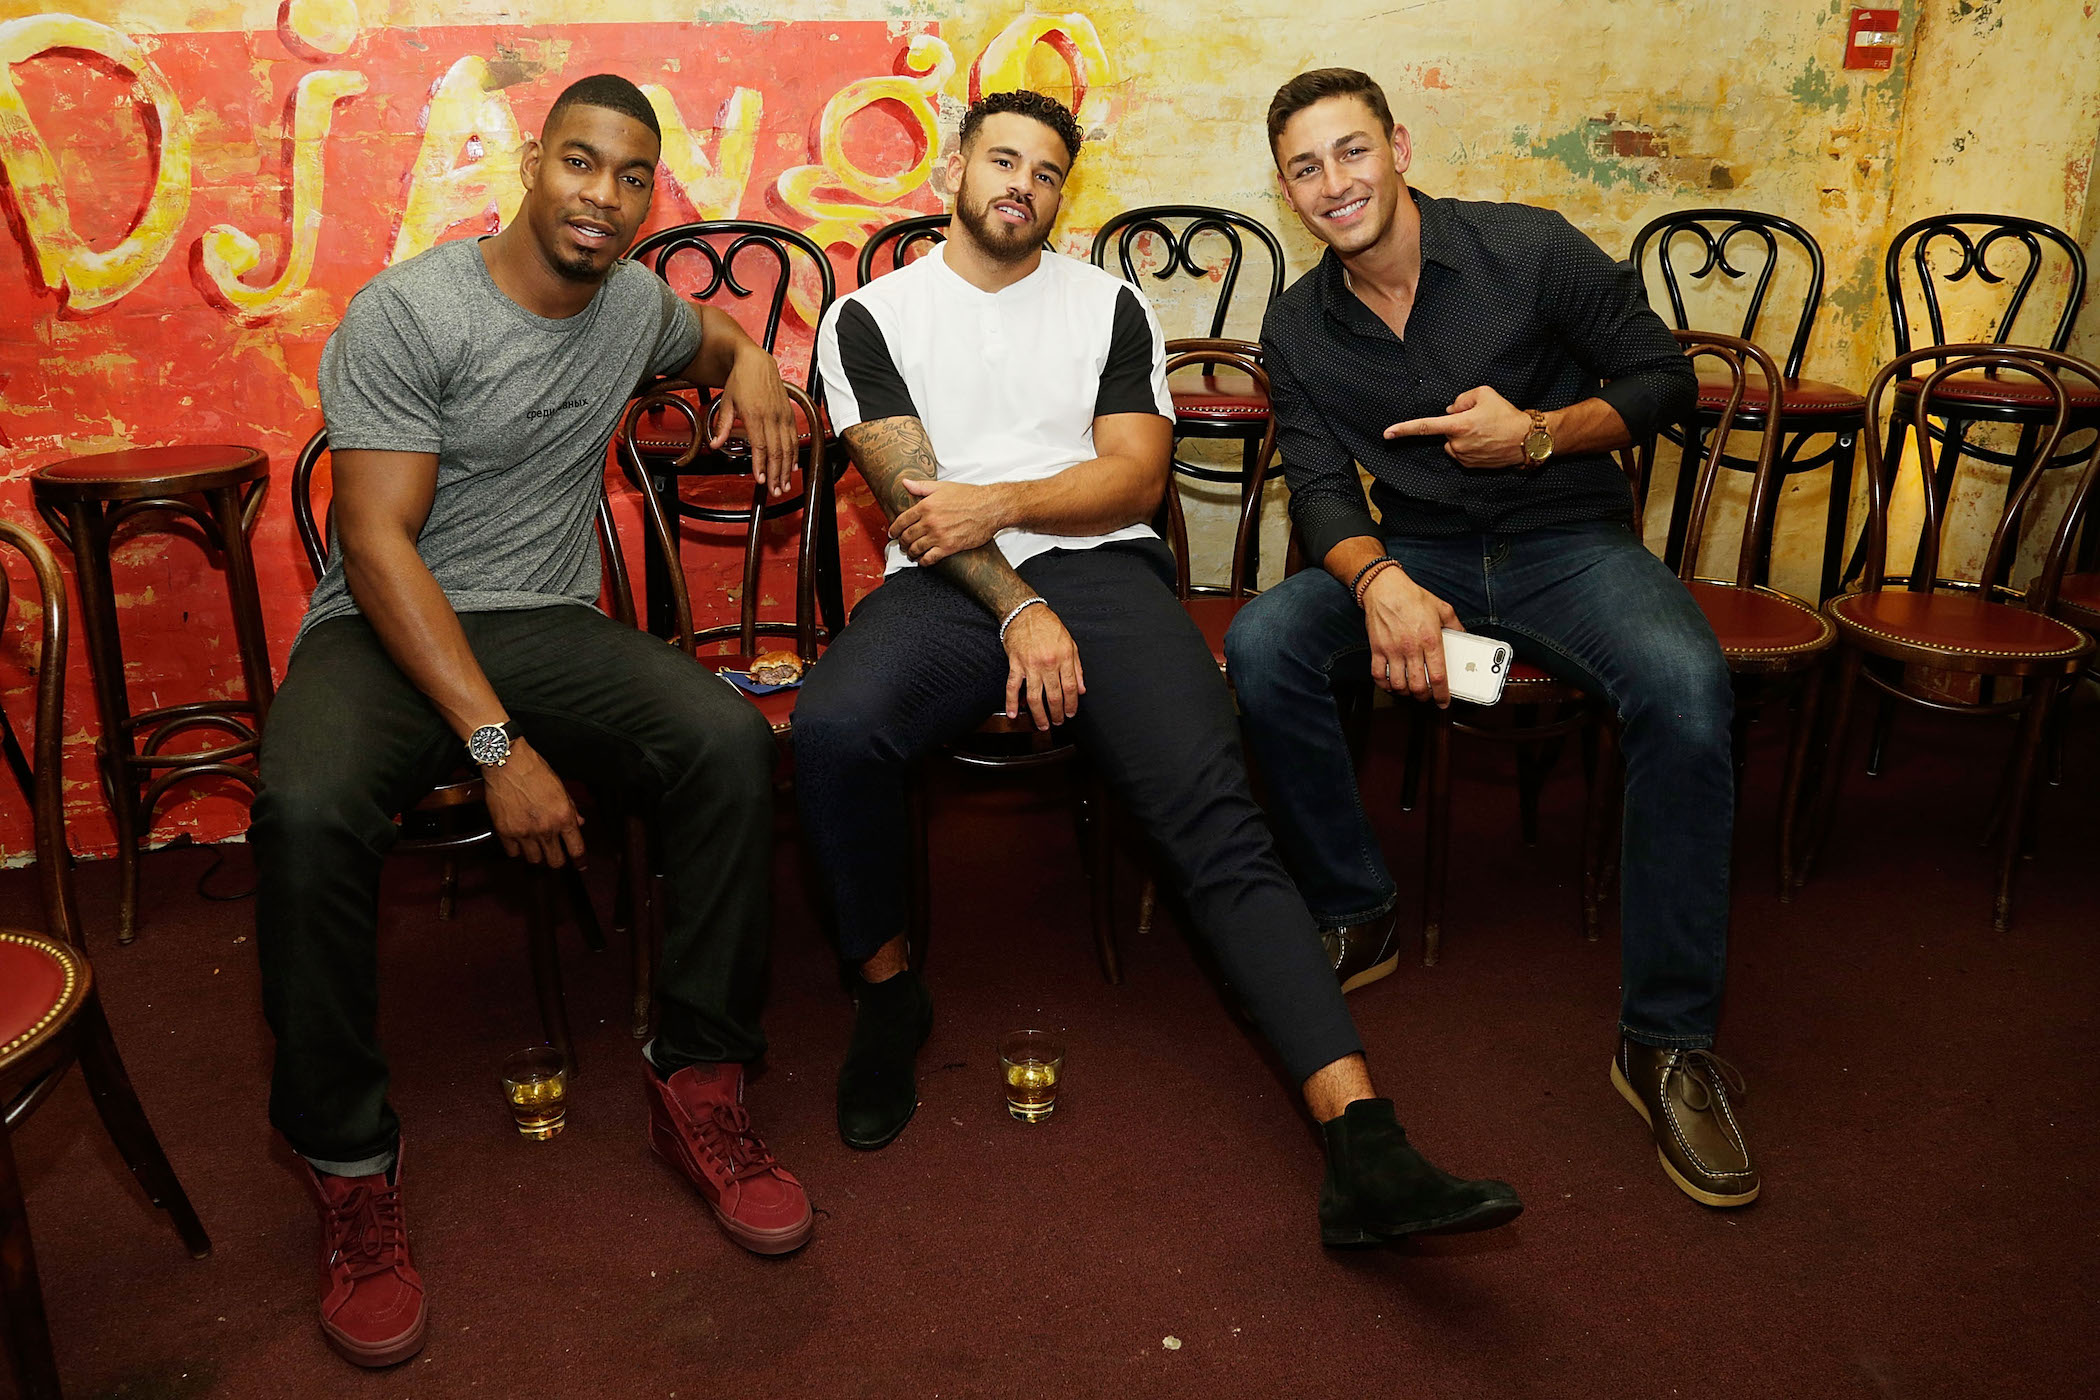 Leroy Garrett, Cory Wharton, and Tony Raines sitting together from MTV's 'The Challenge' cast 